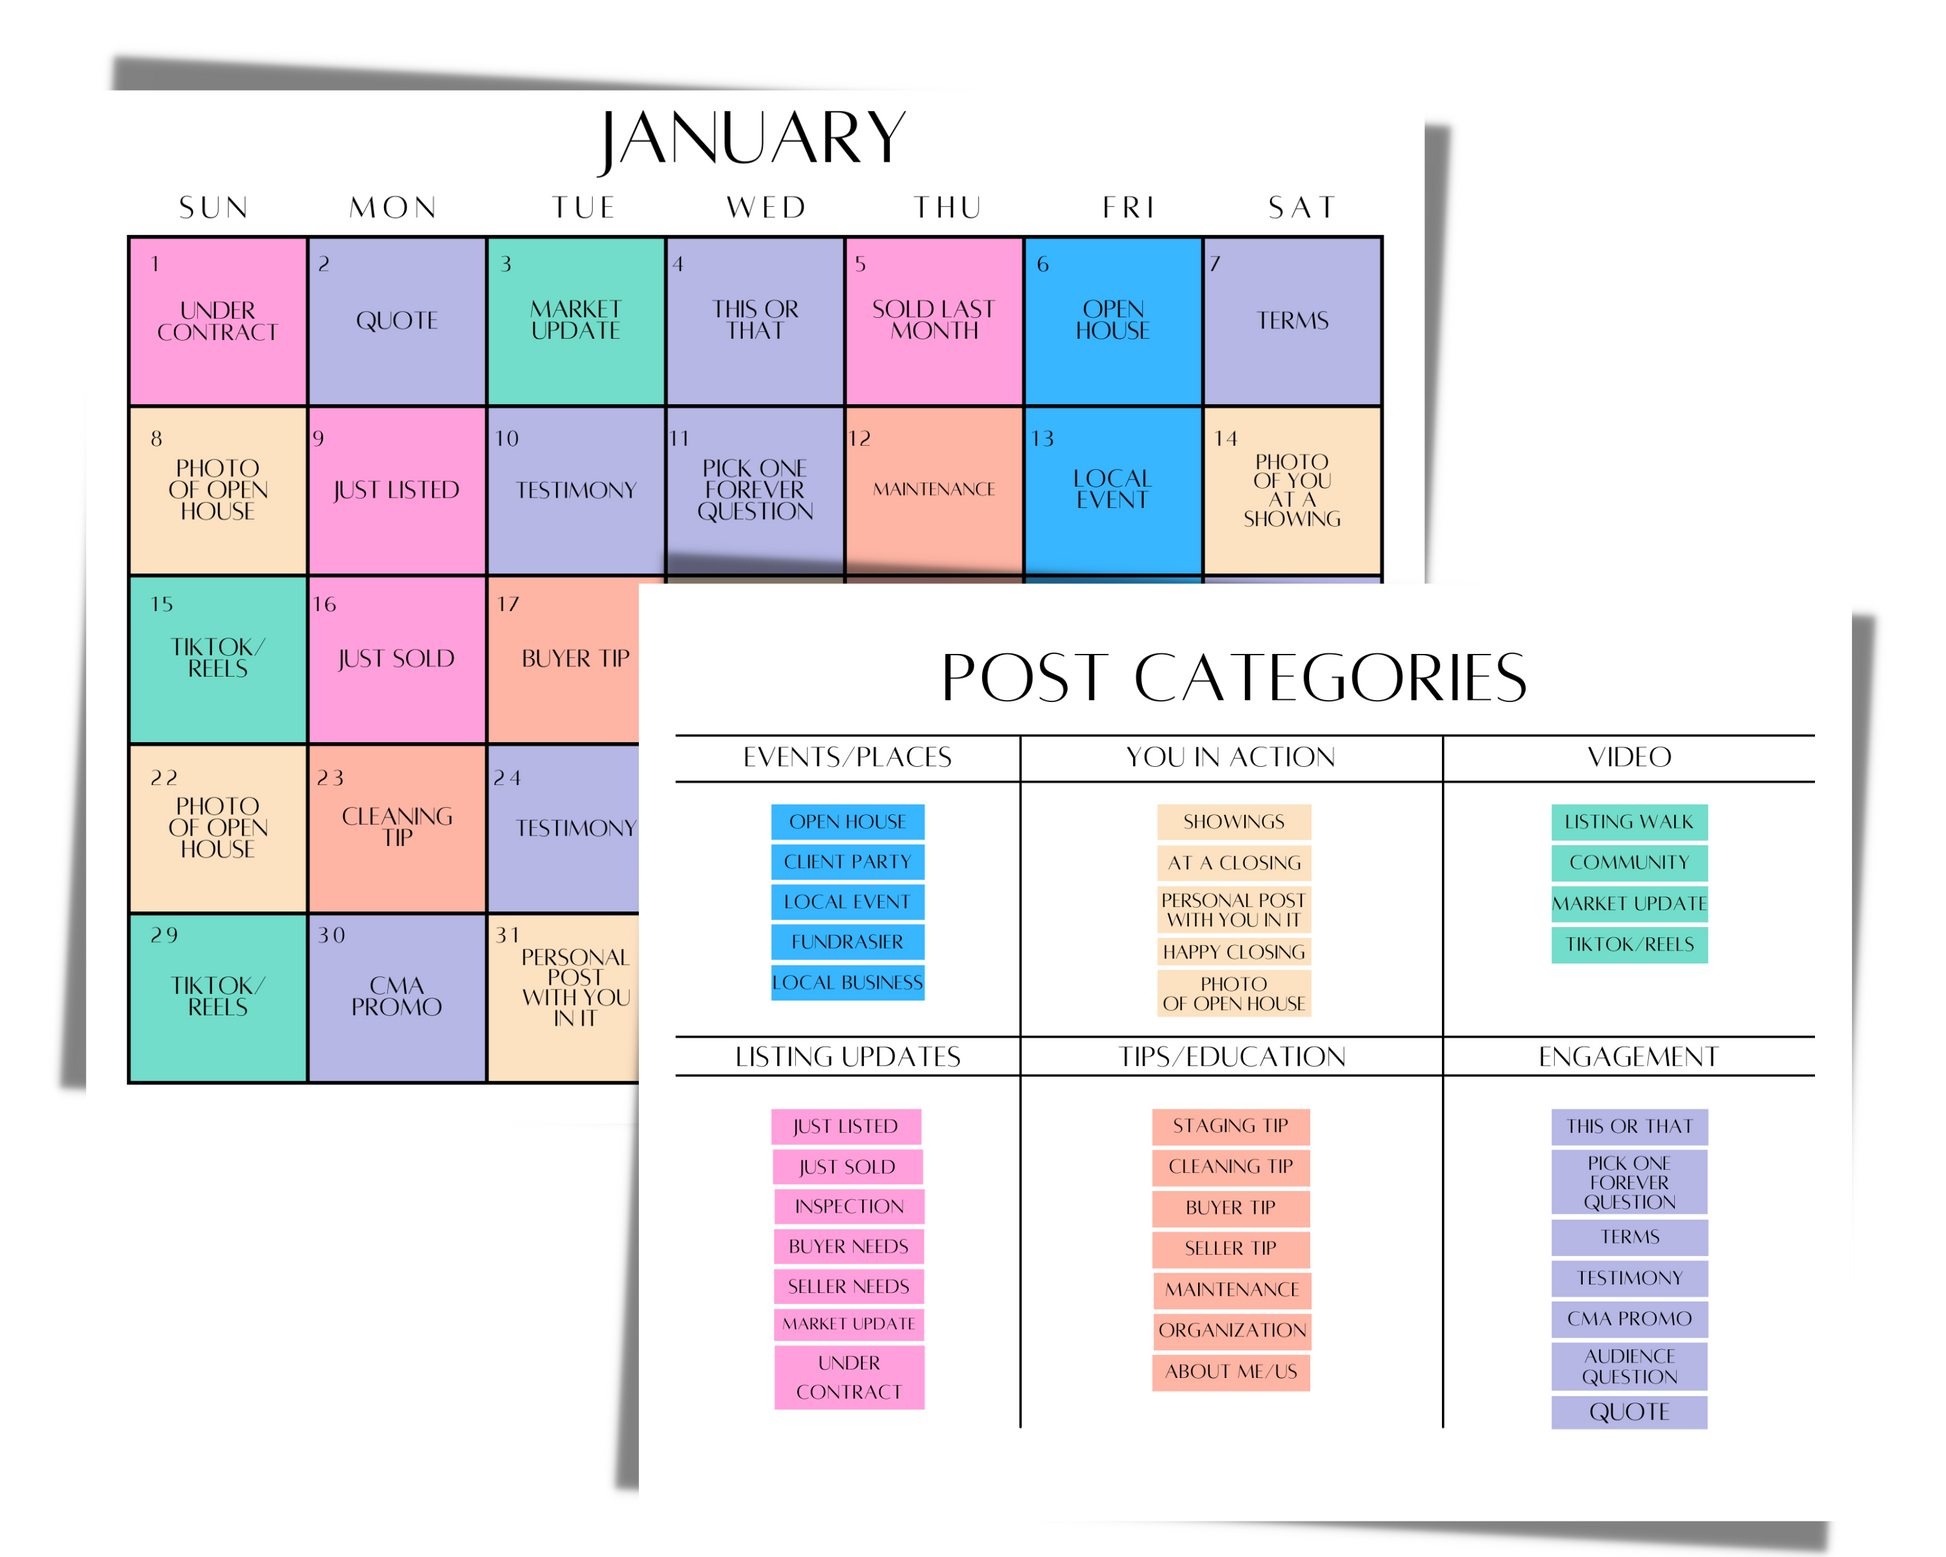 How to Create a Content Calendar - Reinvented Delaware